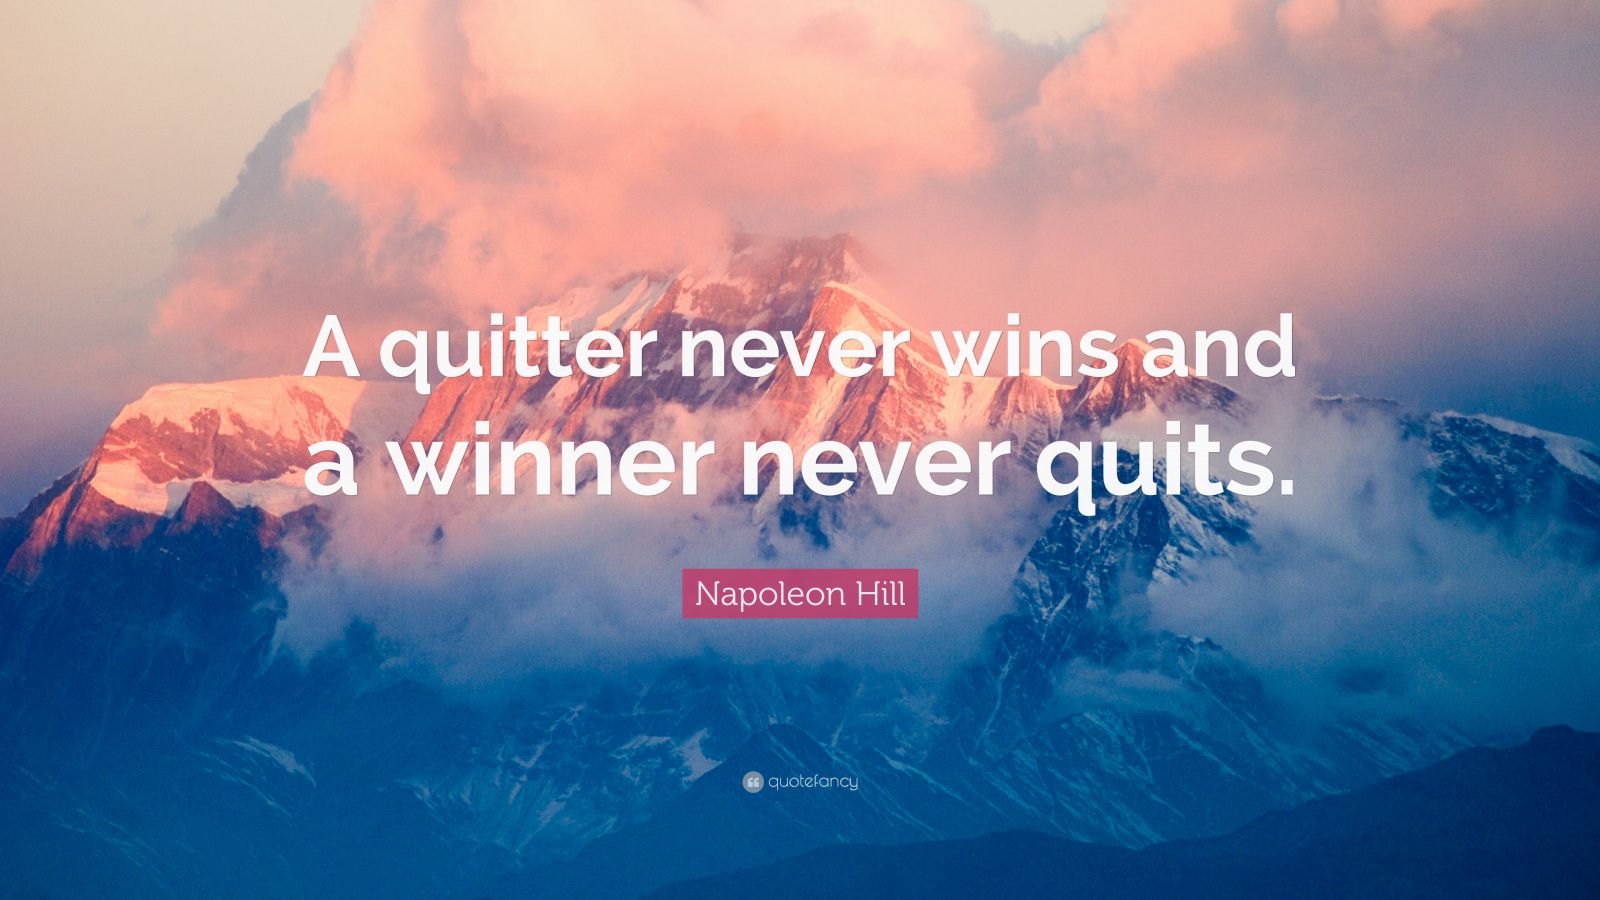 a quitter never wins and a winner never quits